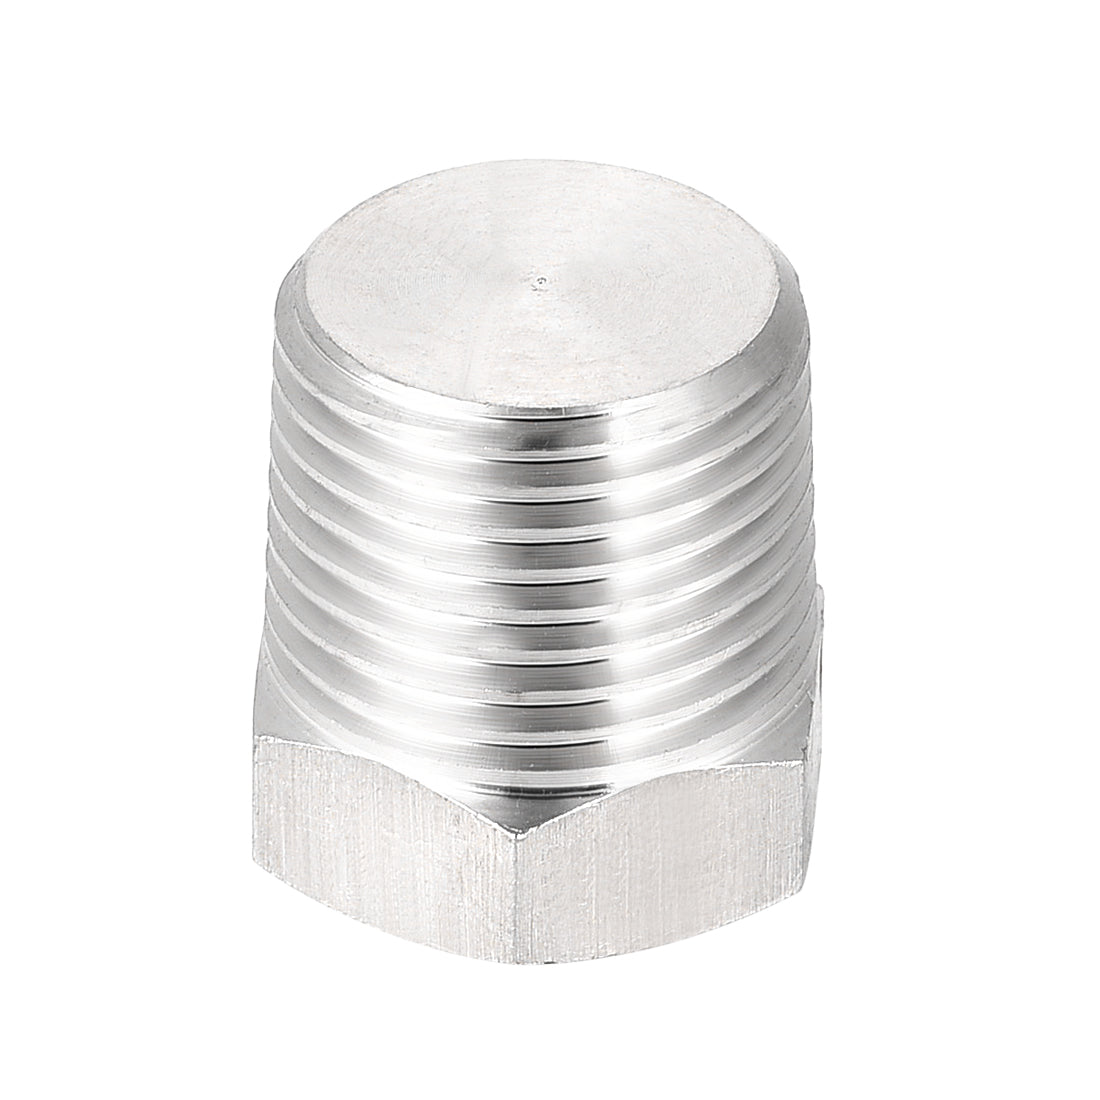 uxcell Uxcell 3/8NPT Male Outer Hex Head Plug - 304 Stainless Steel Solid Thread Corrosion Resistant Bung Plug Pipe Fitting